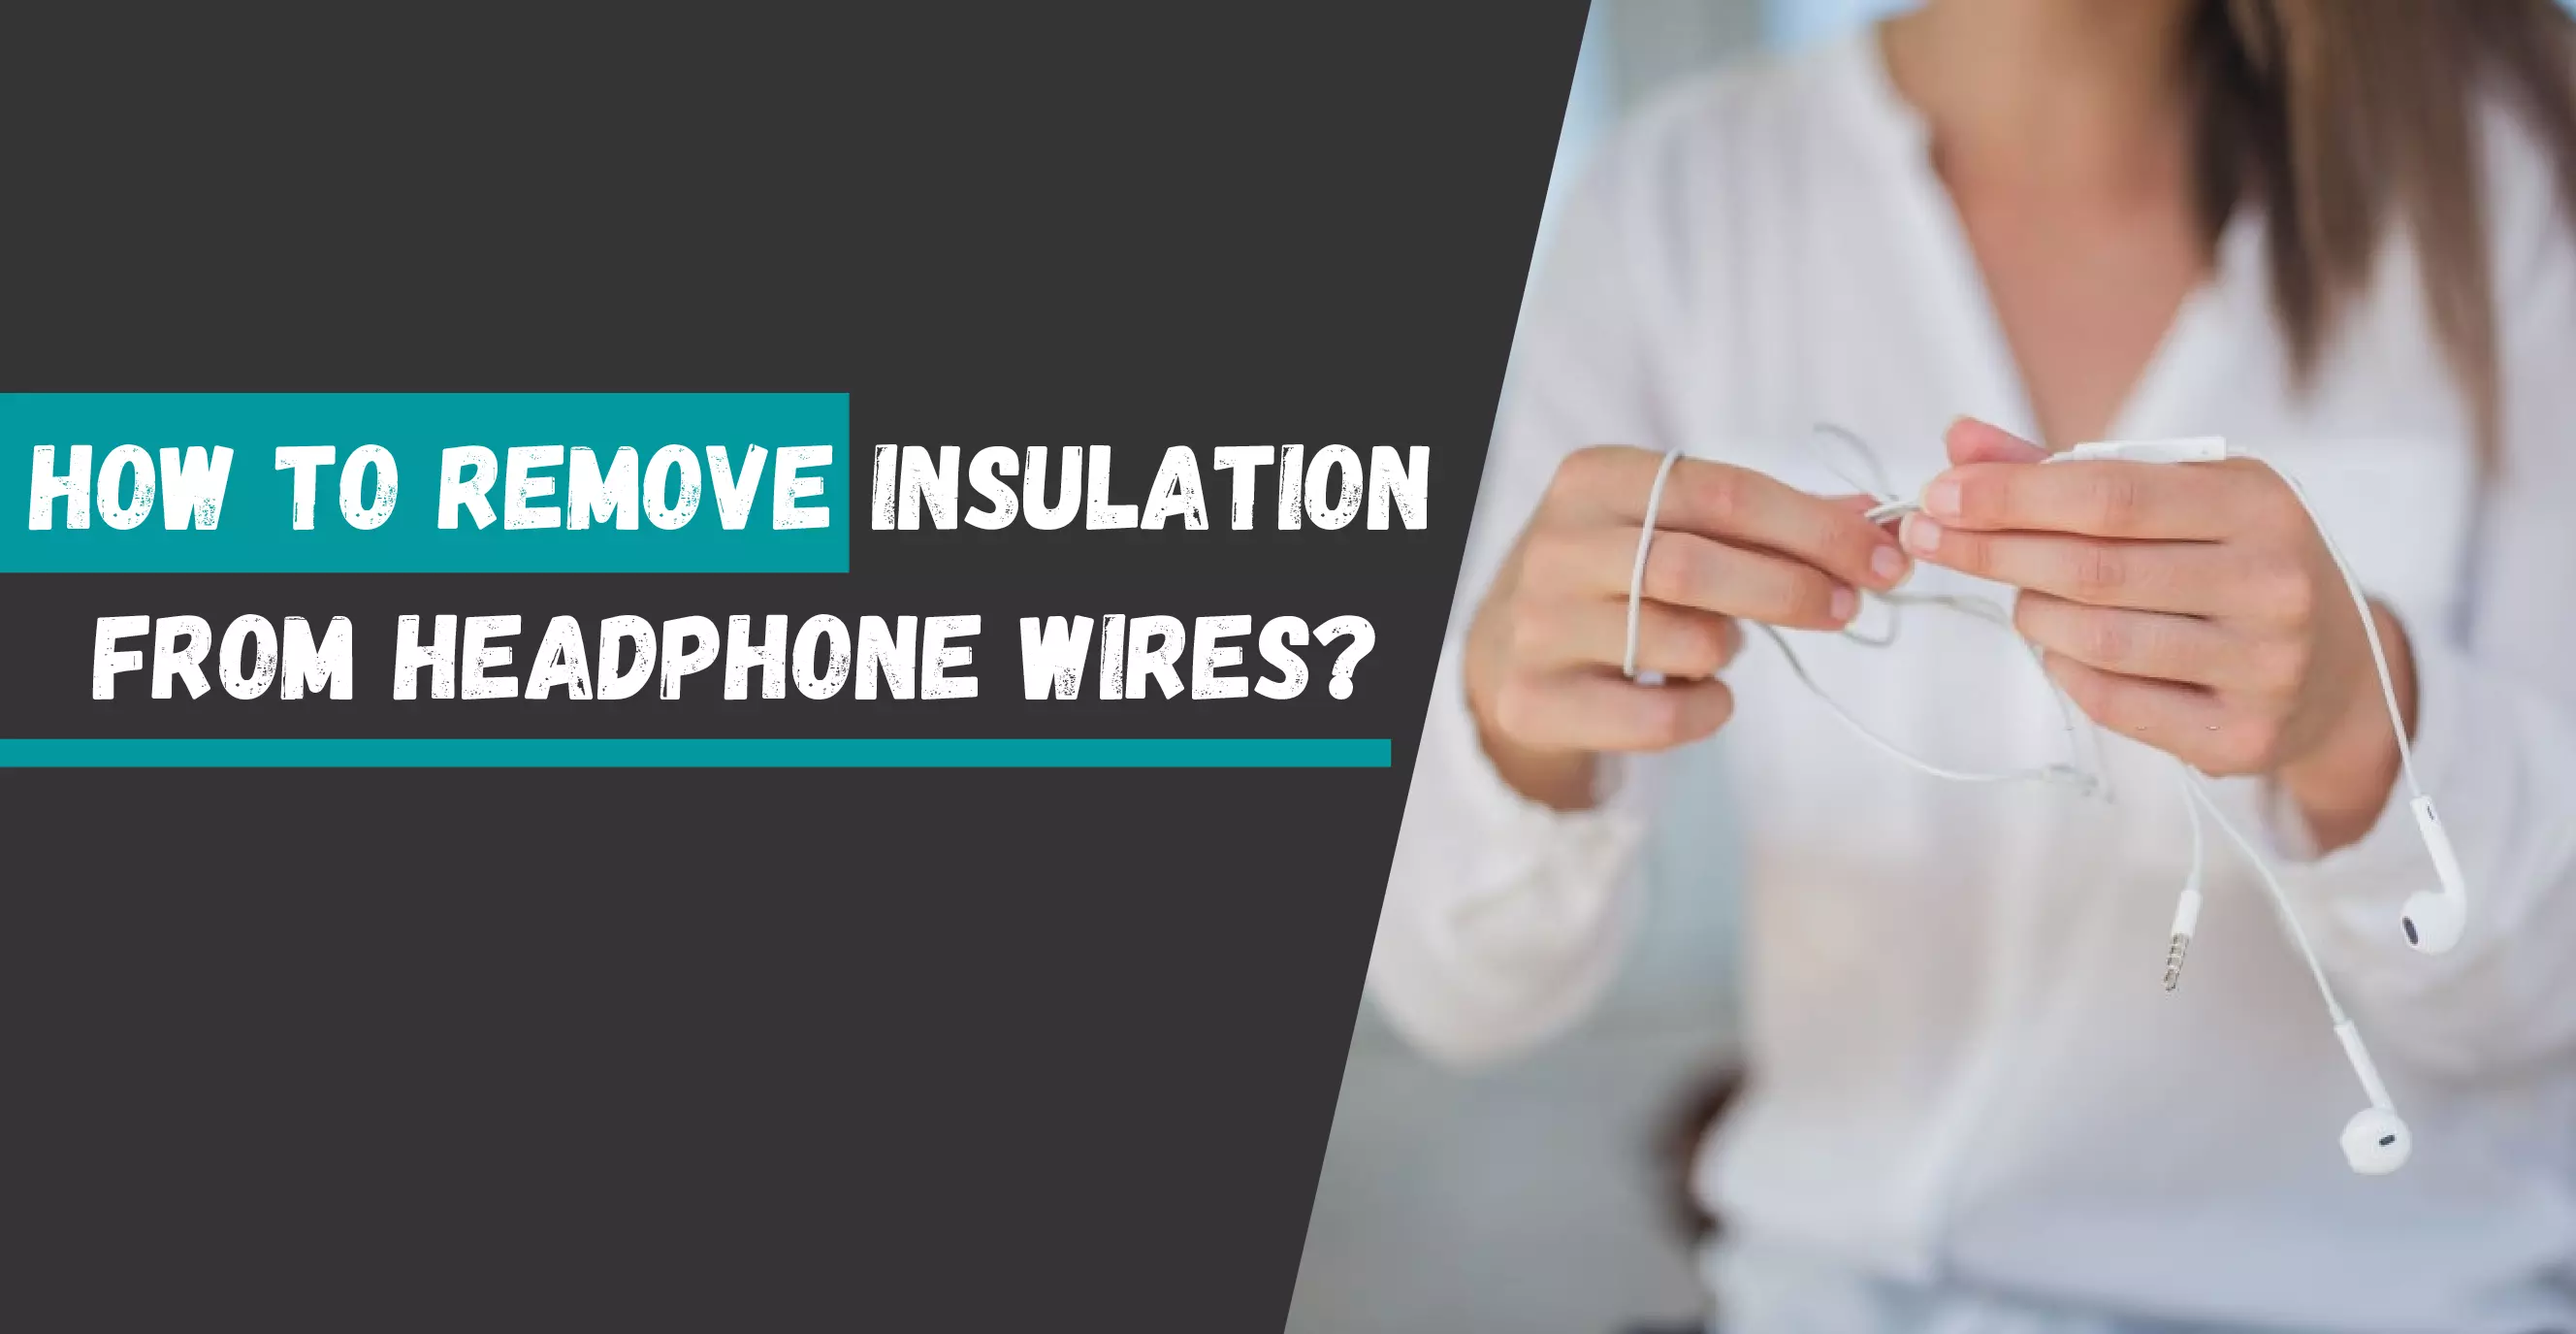 Remove Insulation From Headphone Wire